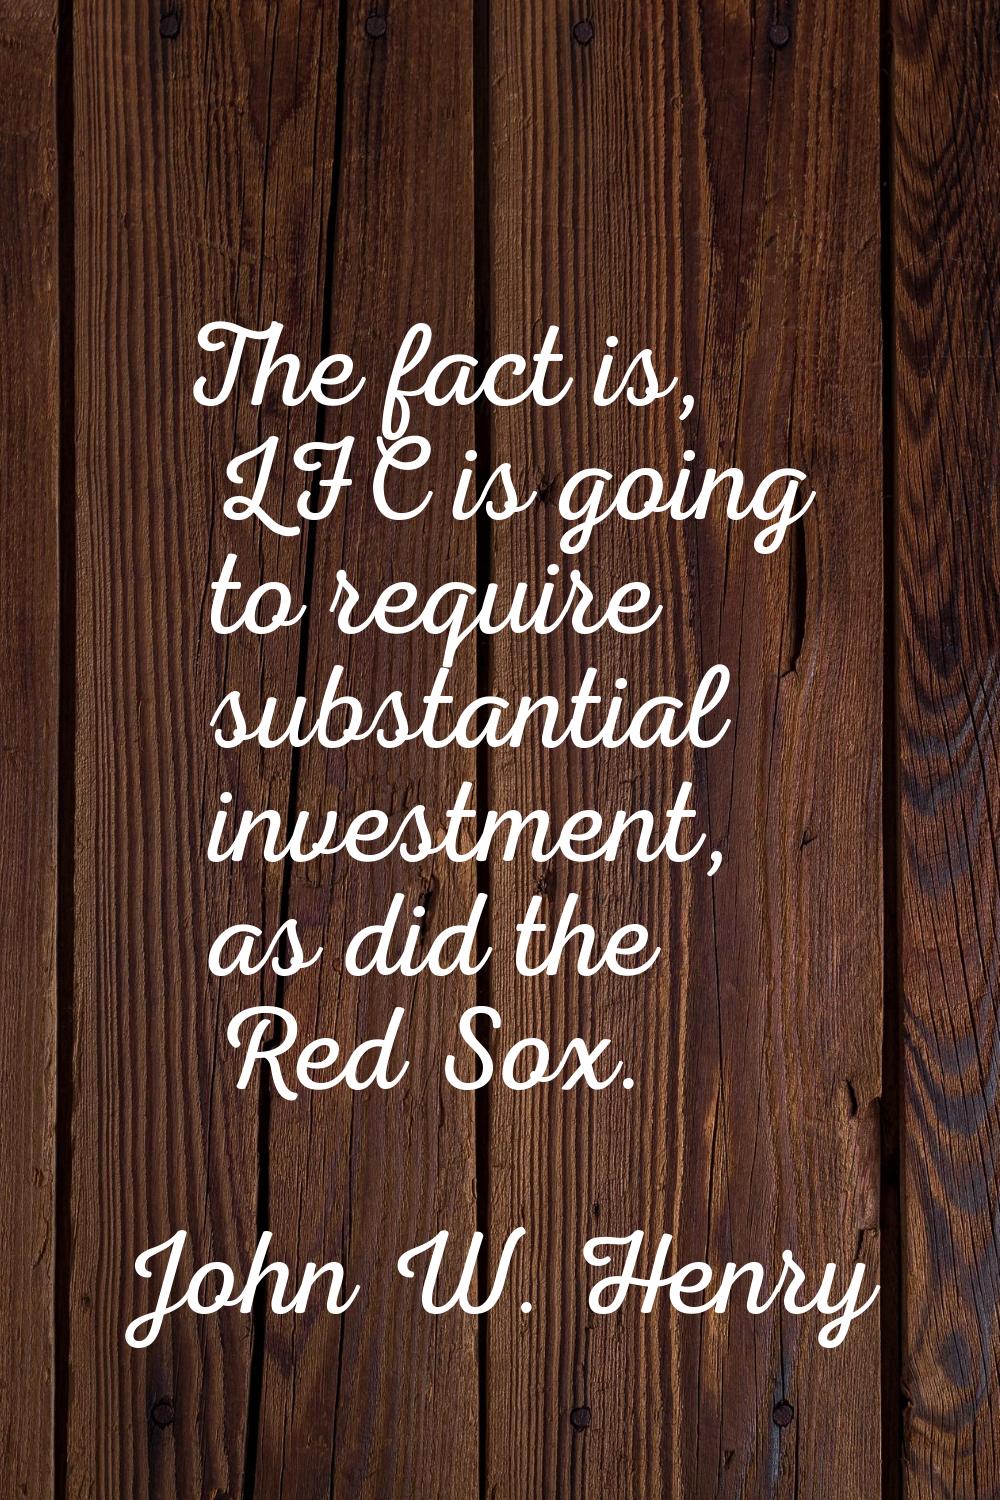 The fact is, LFC is going to require substantial investment, as did the Red Sox.